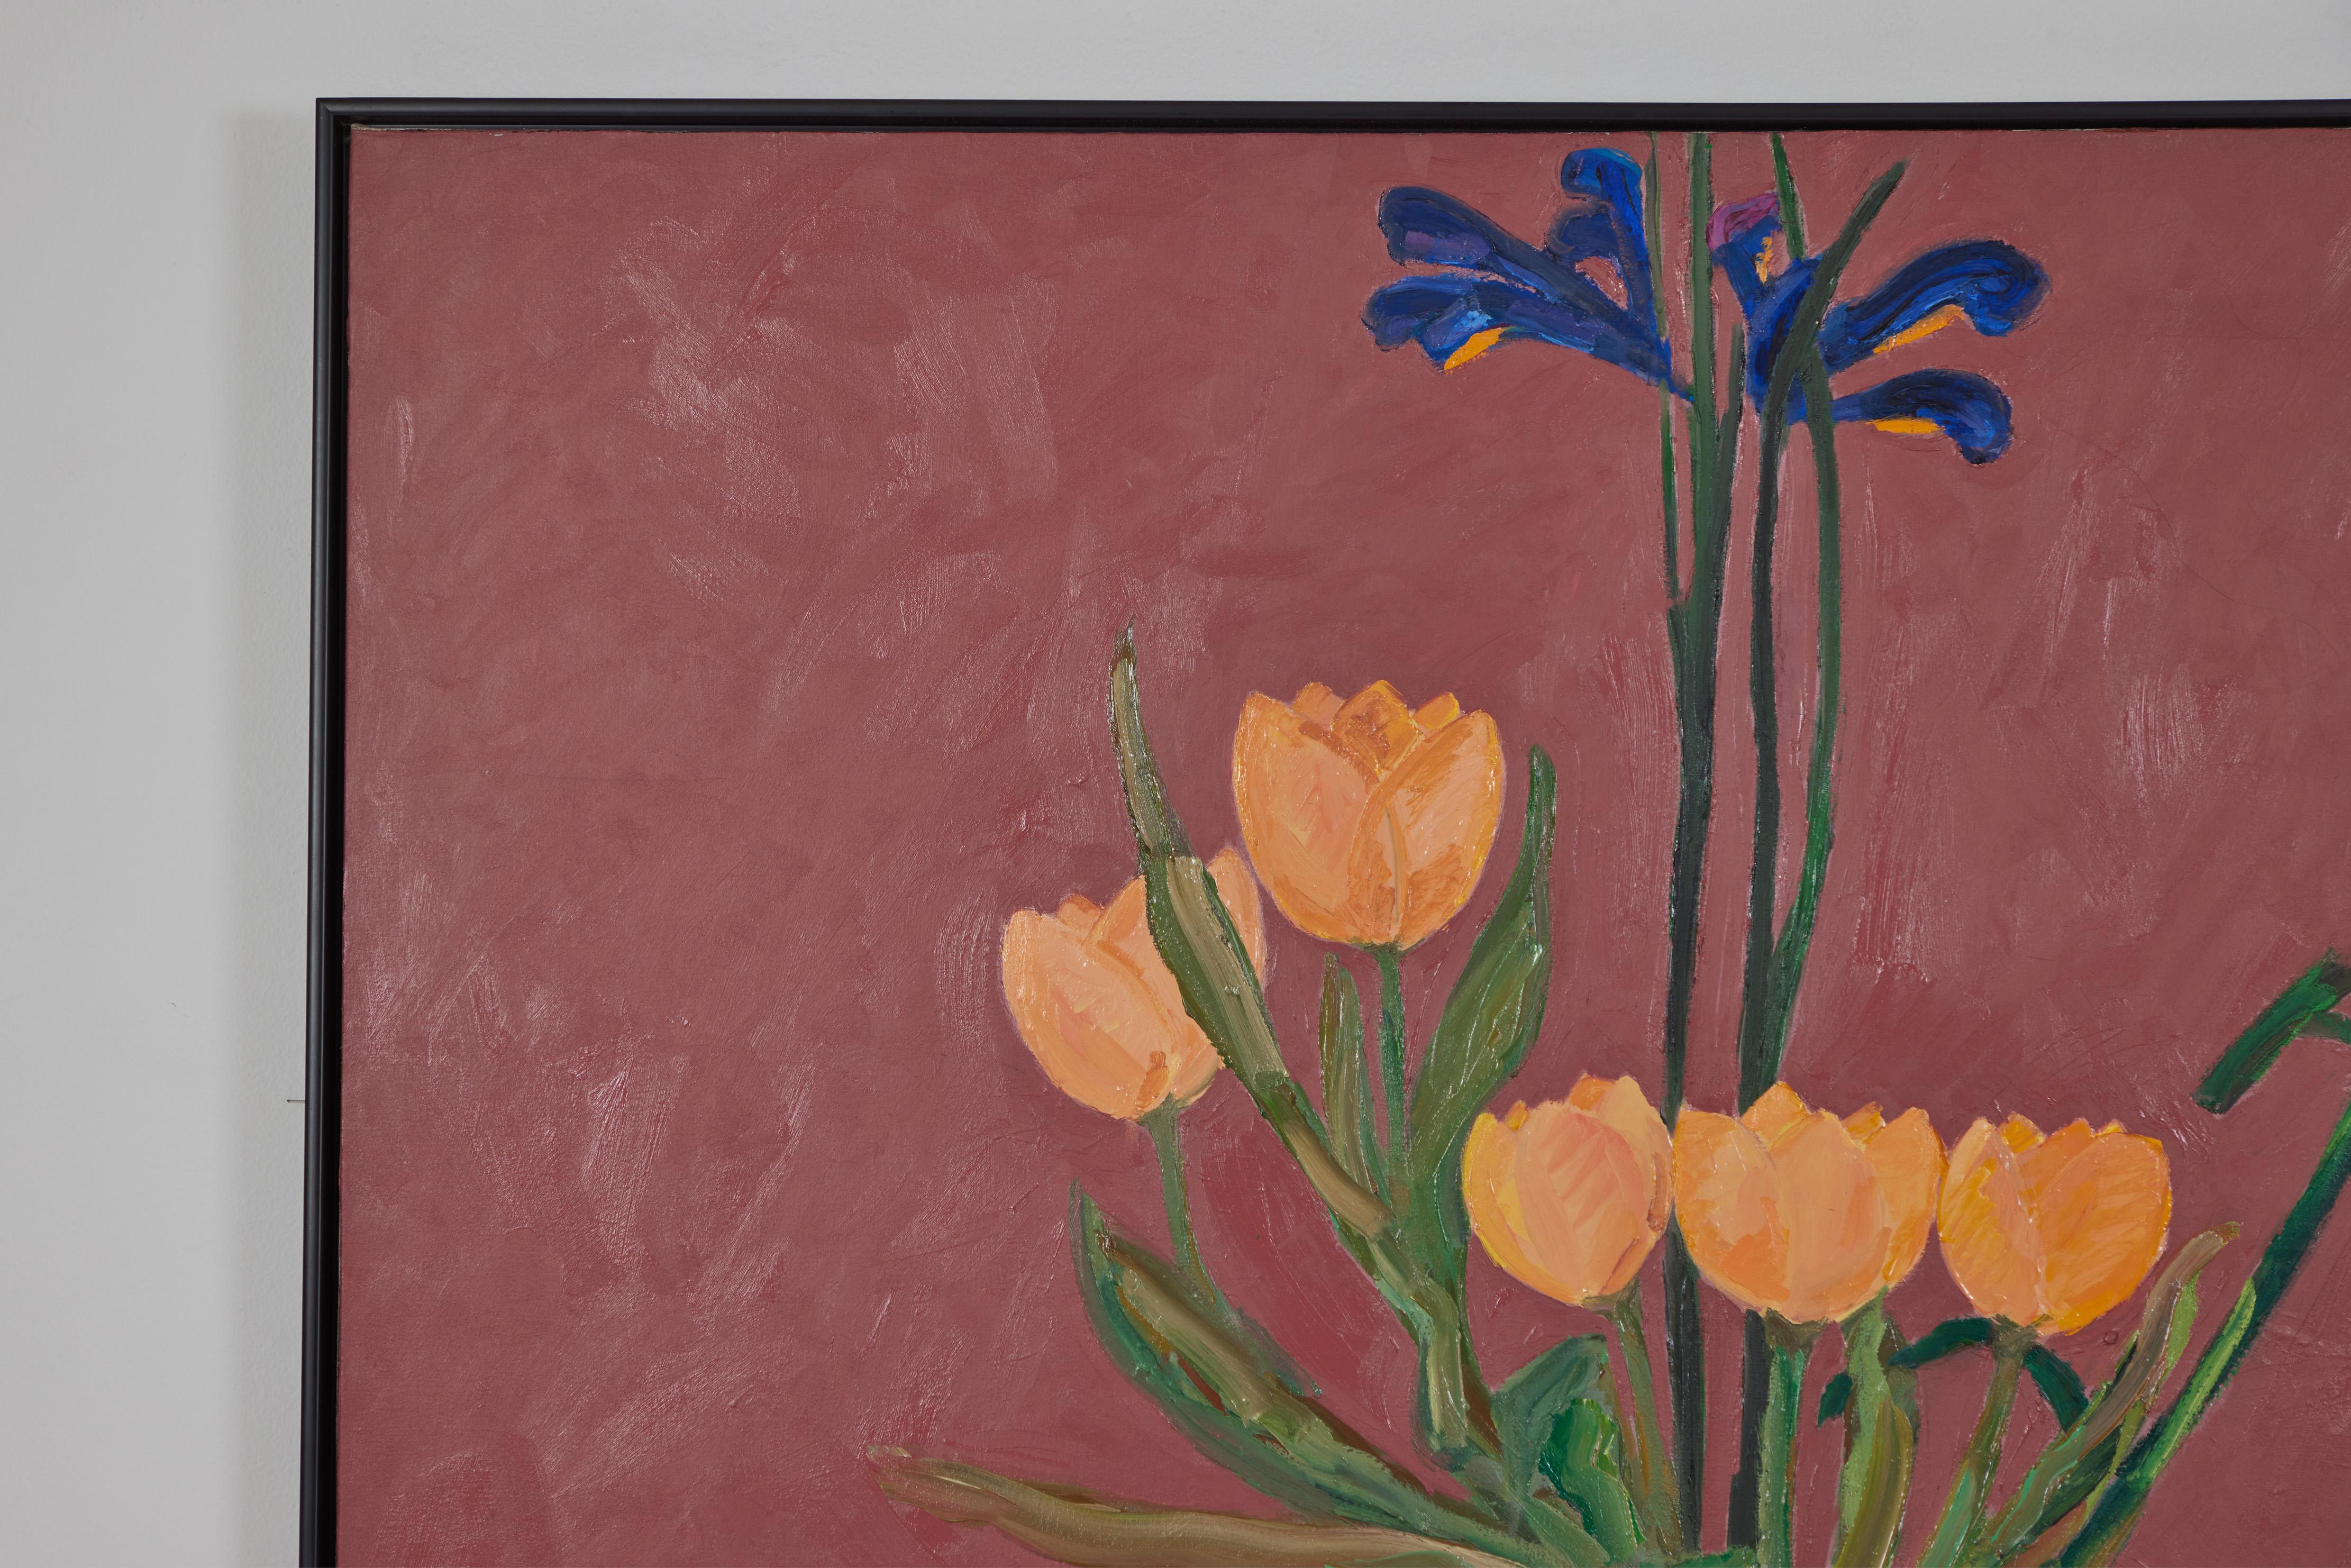 American An Oversized Floral Still Life, Oil on Canvas, Sarkis Sarkisian 1909-1977 For Sale